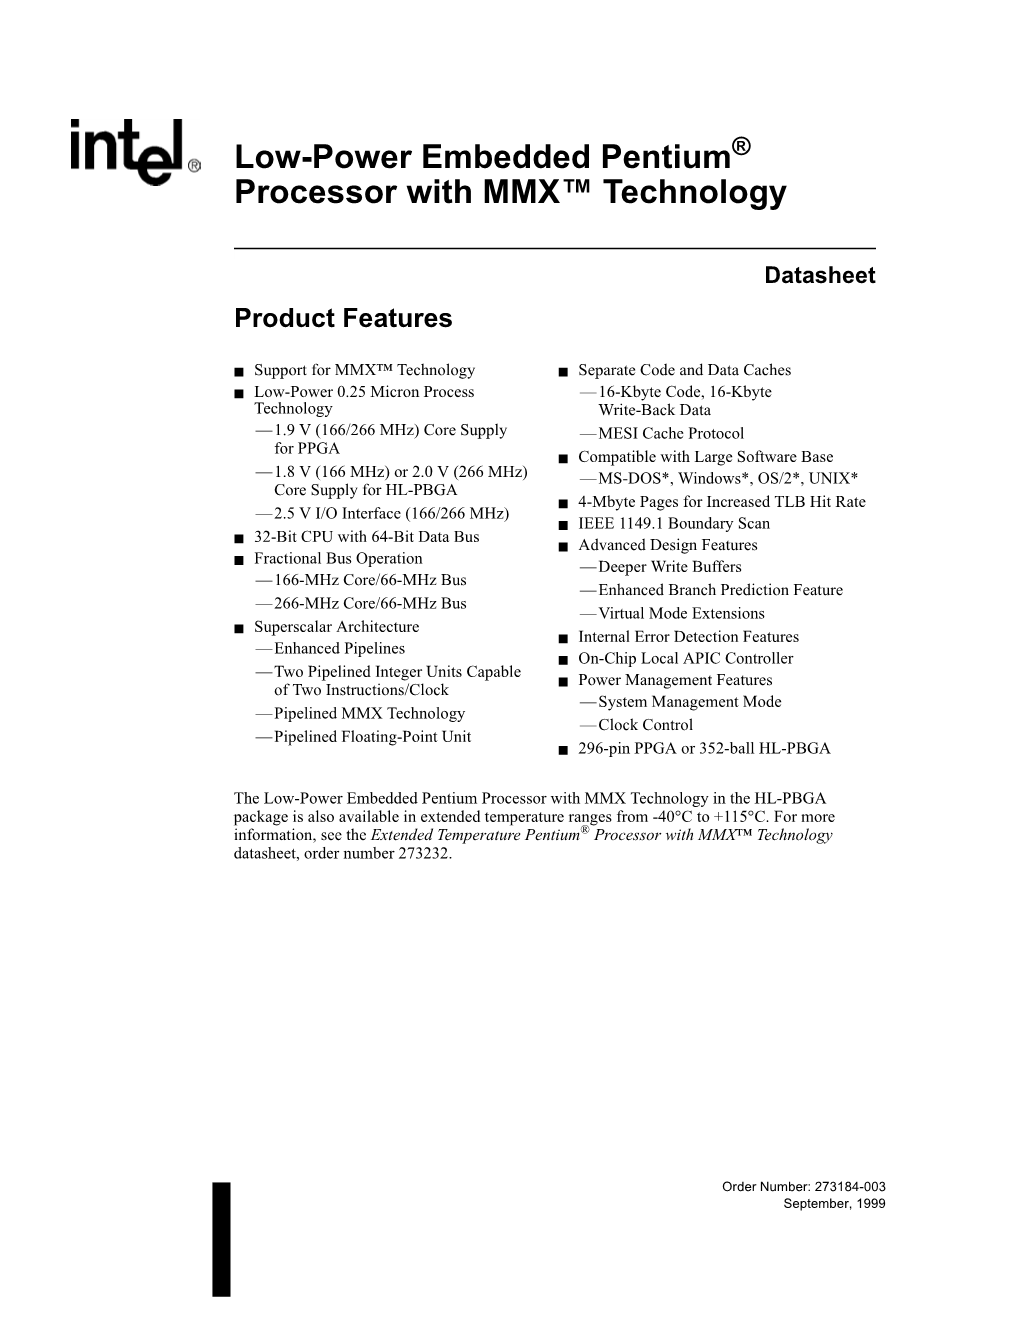 Low-Power Embedded Pentium Processor with MMX™ Technology